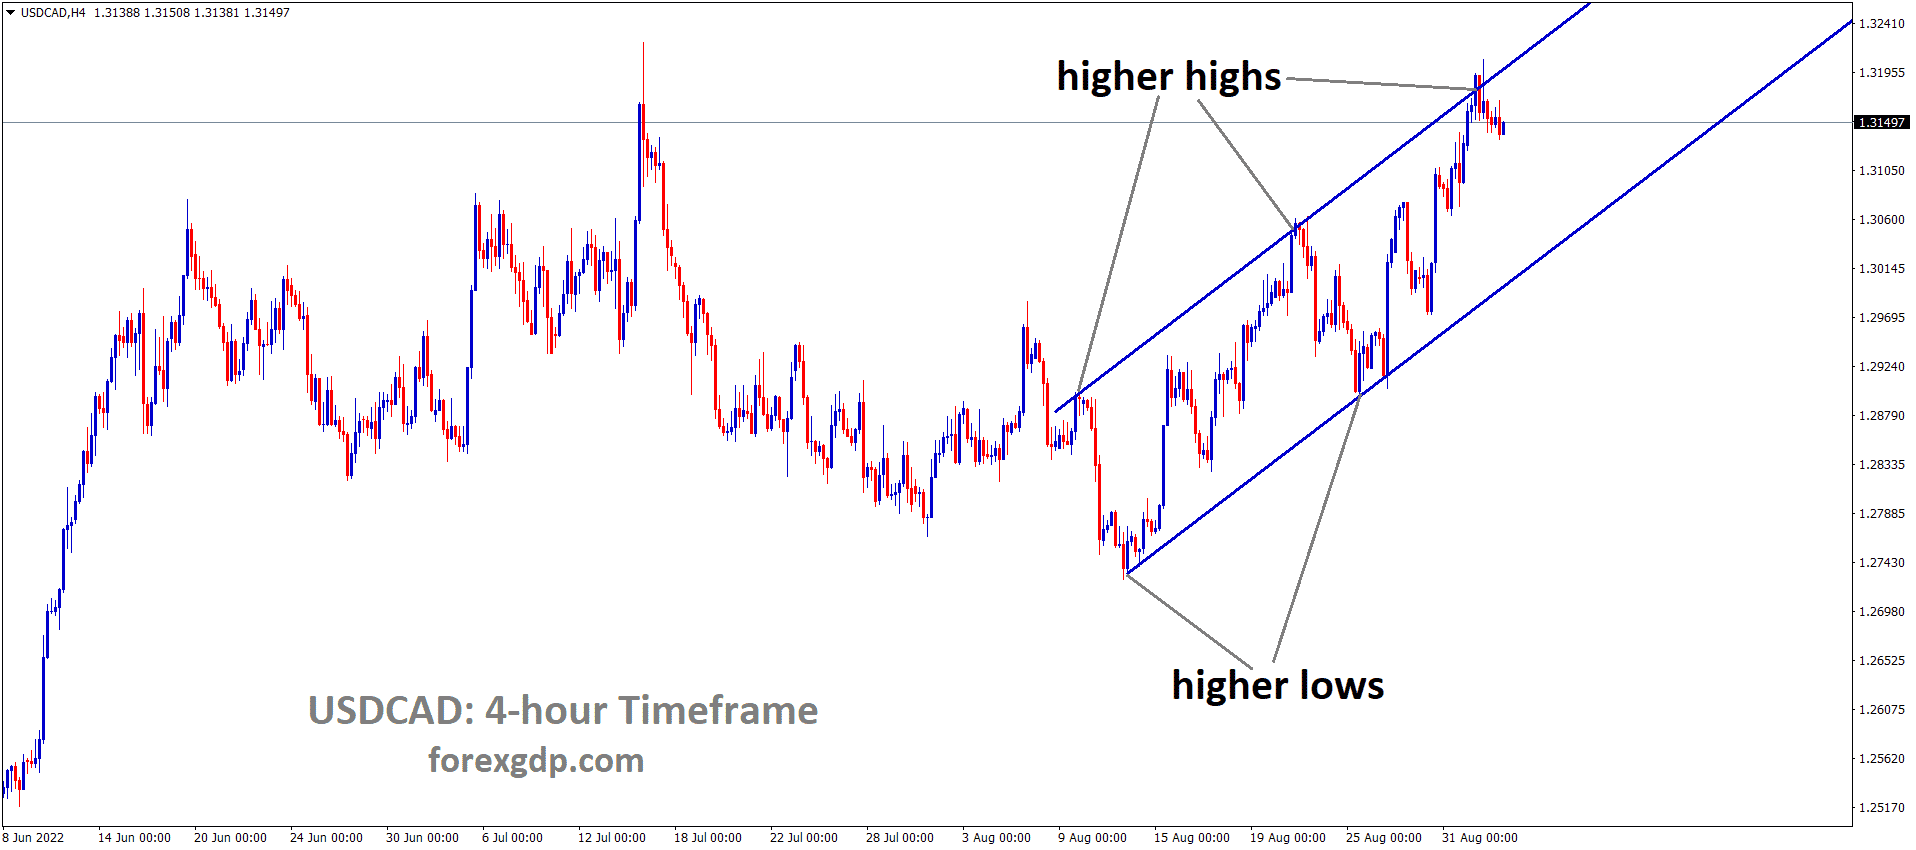 USDCAD is moving in an Ascending channel and the market has fallen from the higher high area of the channel